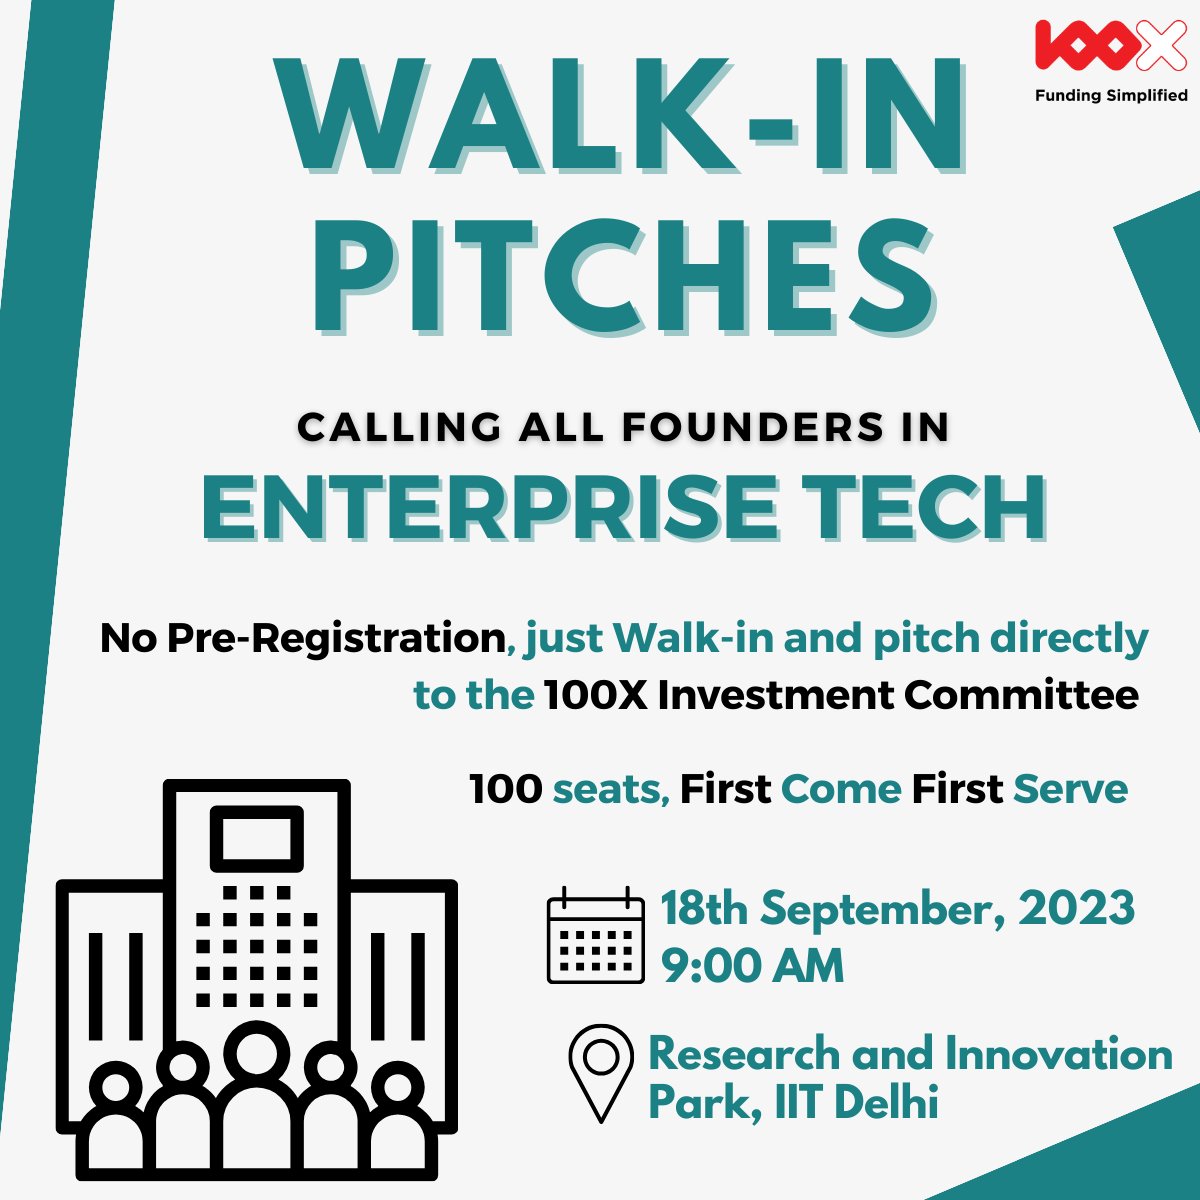 Calling all founders in Enterprise-Tech! Mark your calendars for September 18th, when we invite you to our walk-in pitch event at IIT Delhi's Research and Innovation Park. Doors open at 9 am, and registration will begin simultaneously. #enterprisetech #StartupEvent #IITDelhi